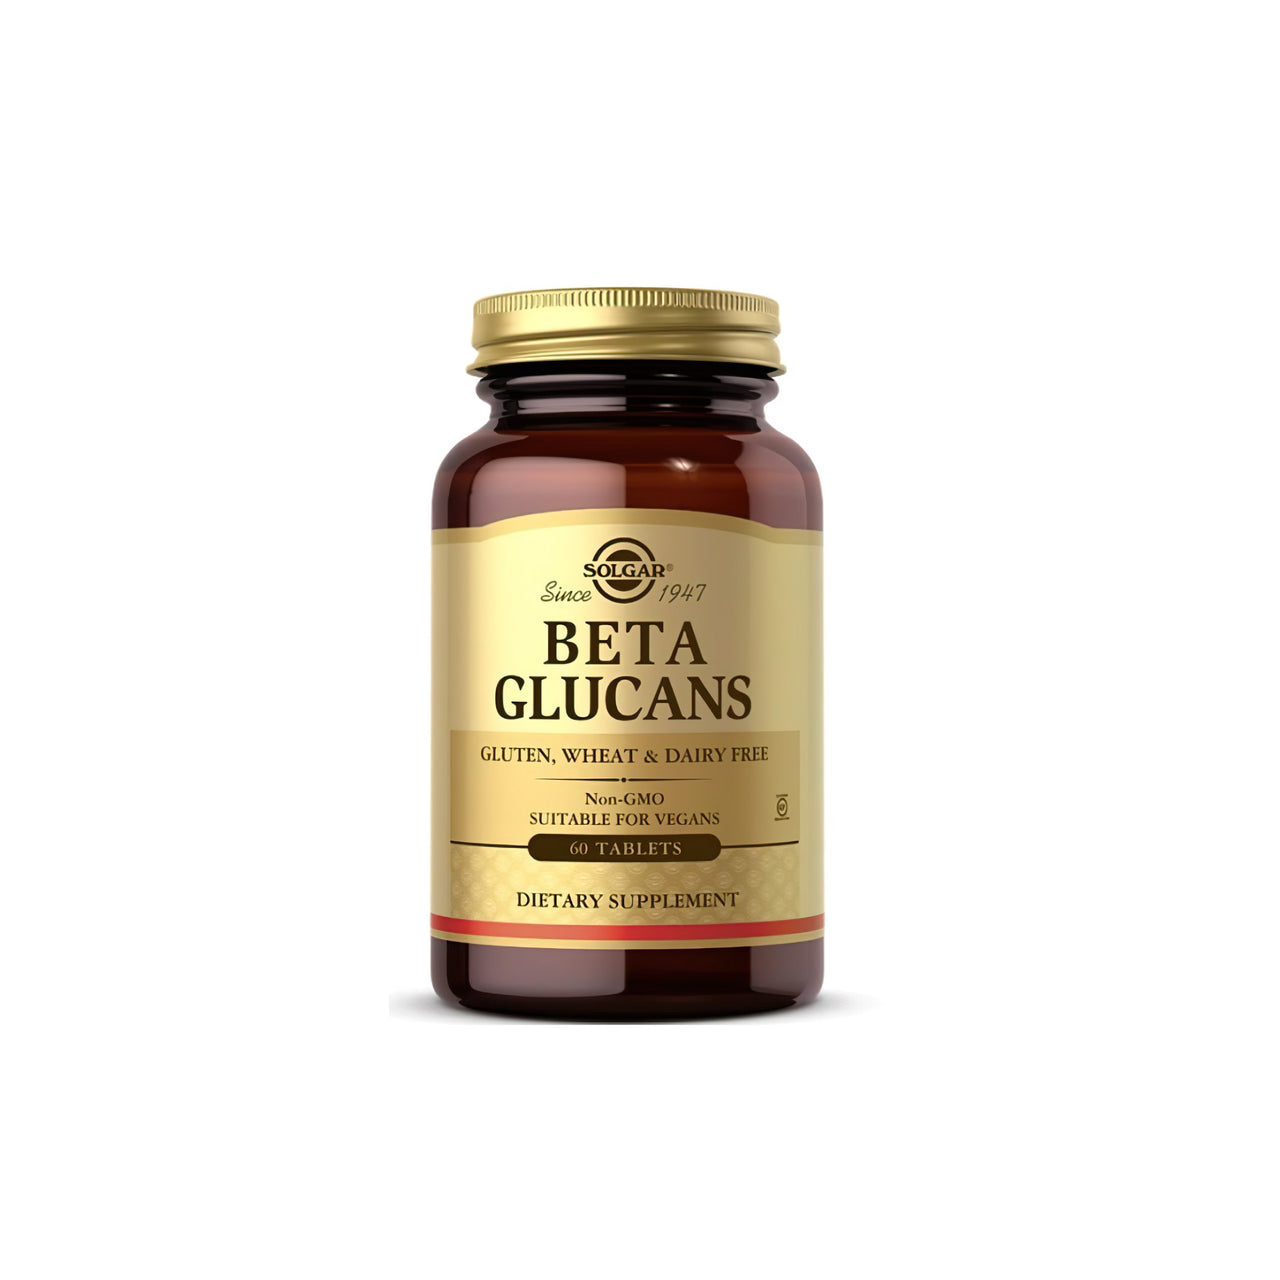 A dietary supplement: Solgar Beta Glucans 60 tablets on a white background.